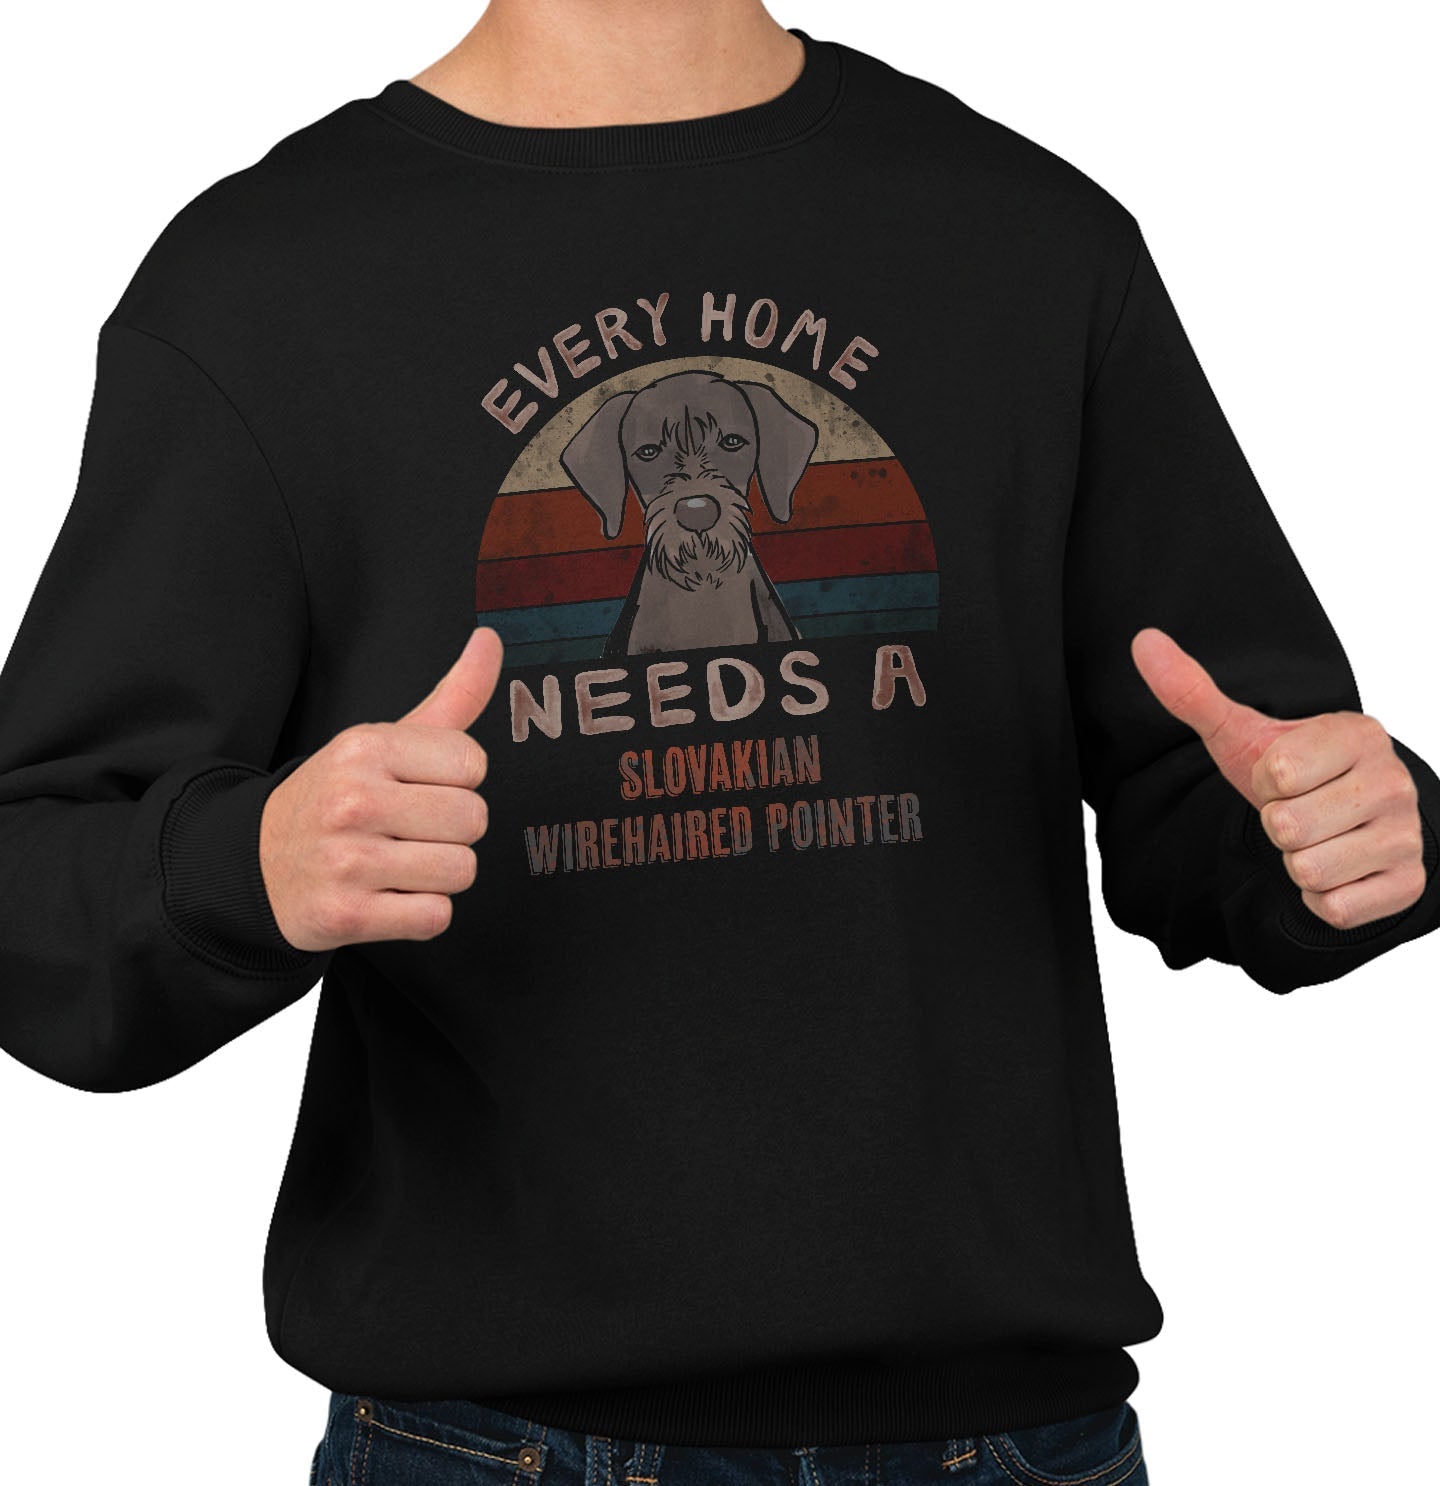 Every Home Needs a Slovakian Wirehaired Pointer - Adult Unisex Crewneck Sweatshirt